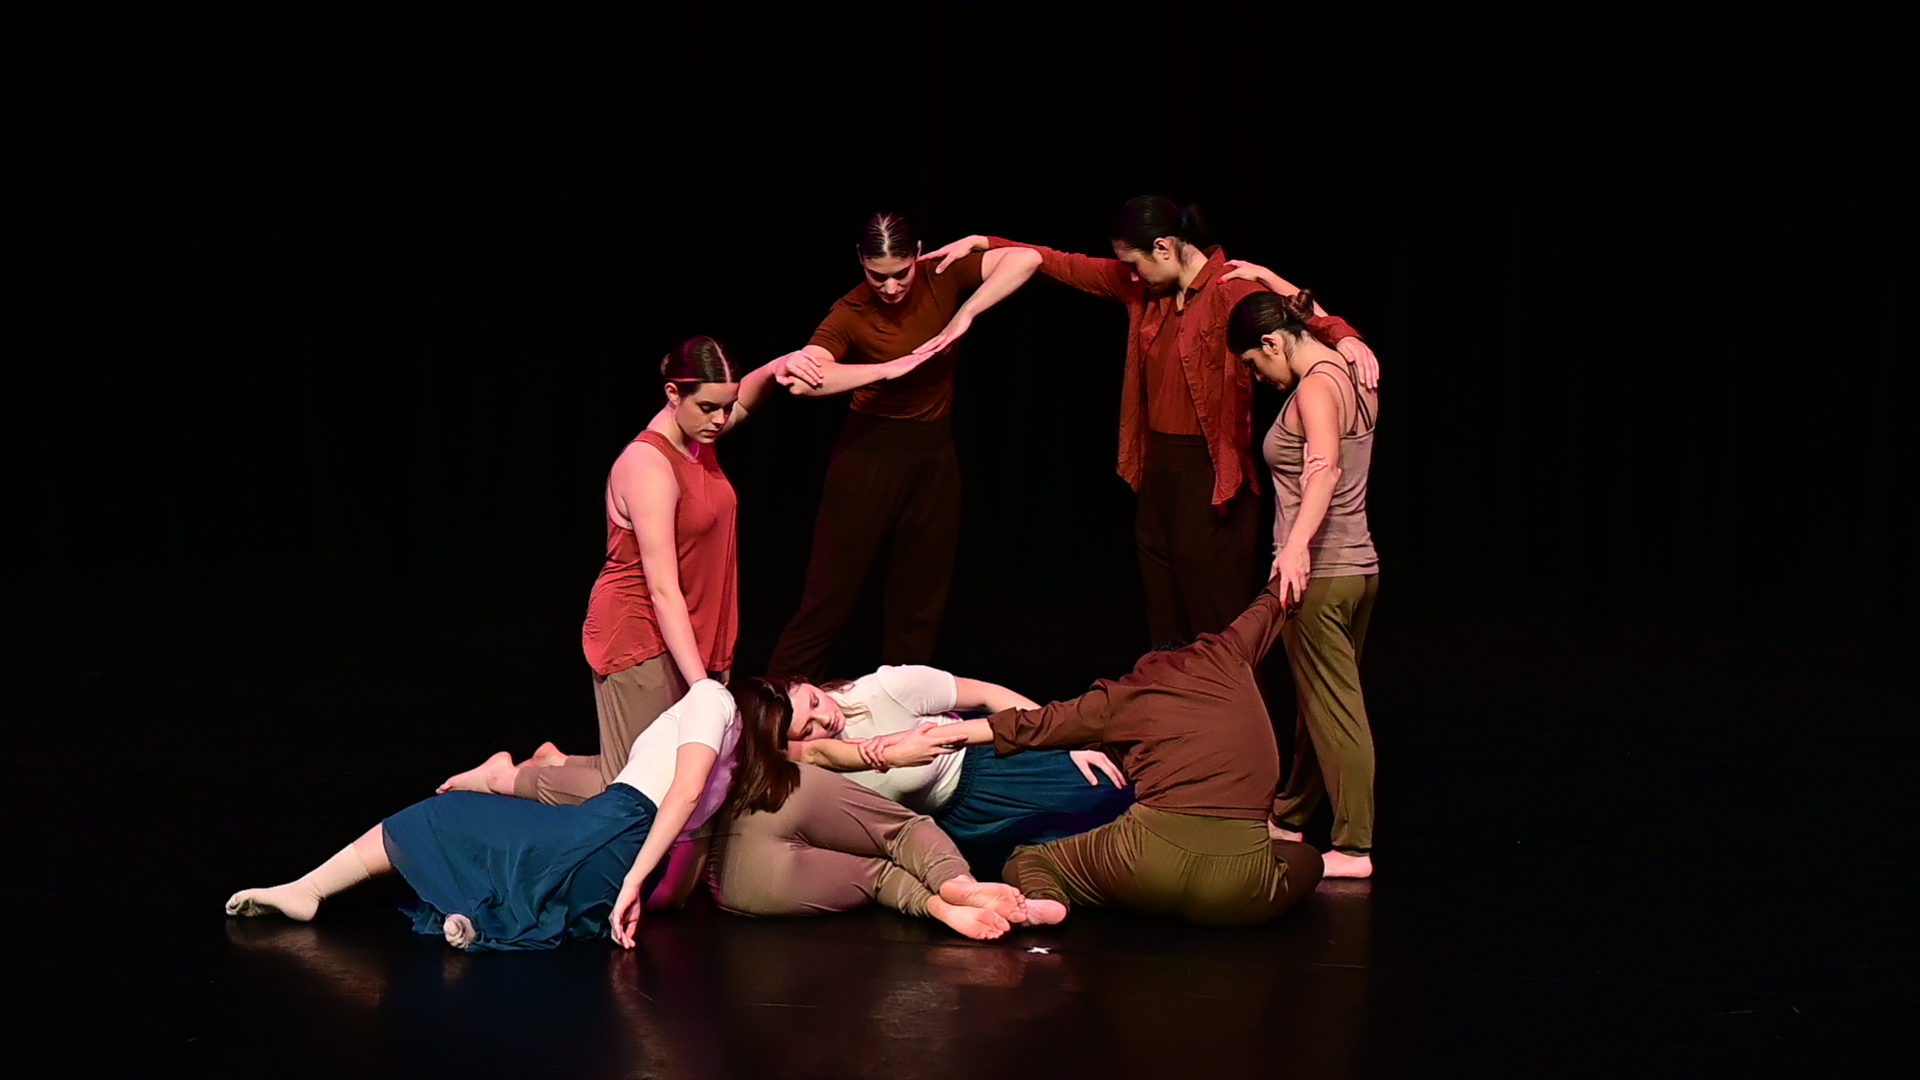 Layla El-Khoury's 'Force of Flows' demonstrates the process and impact of stream bank erosion through dance.